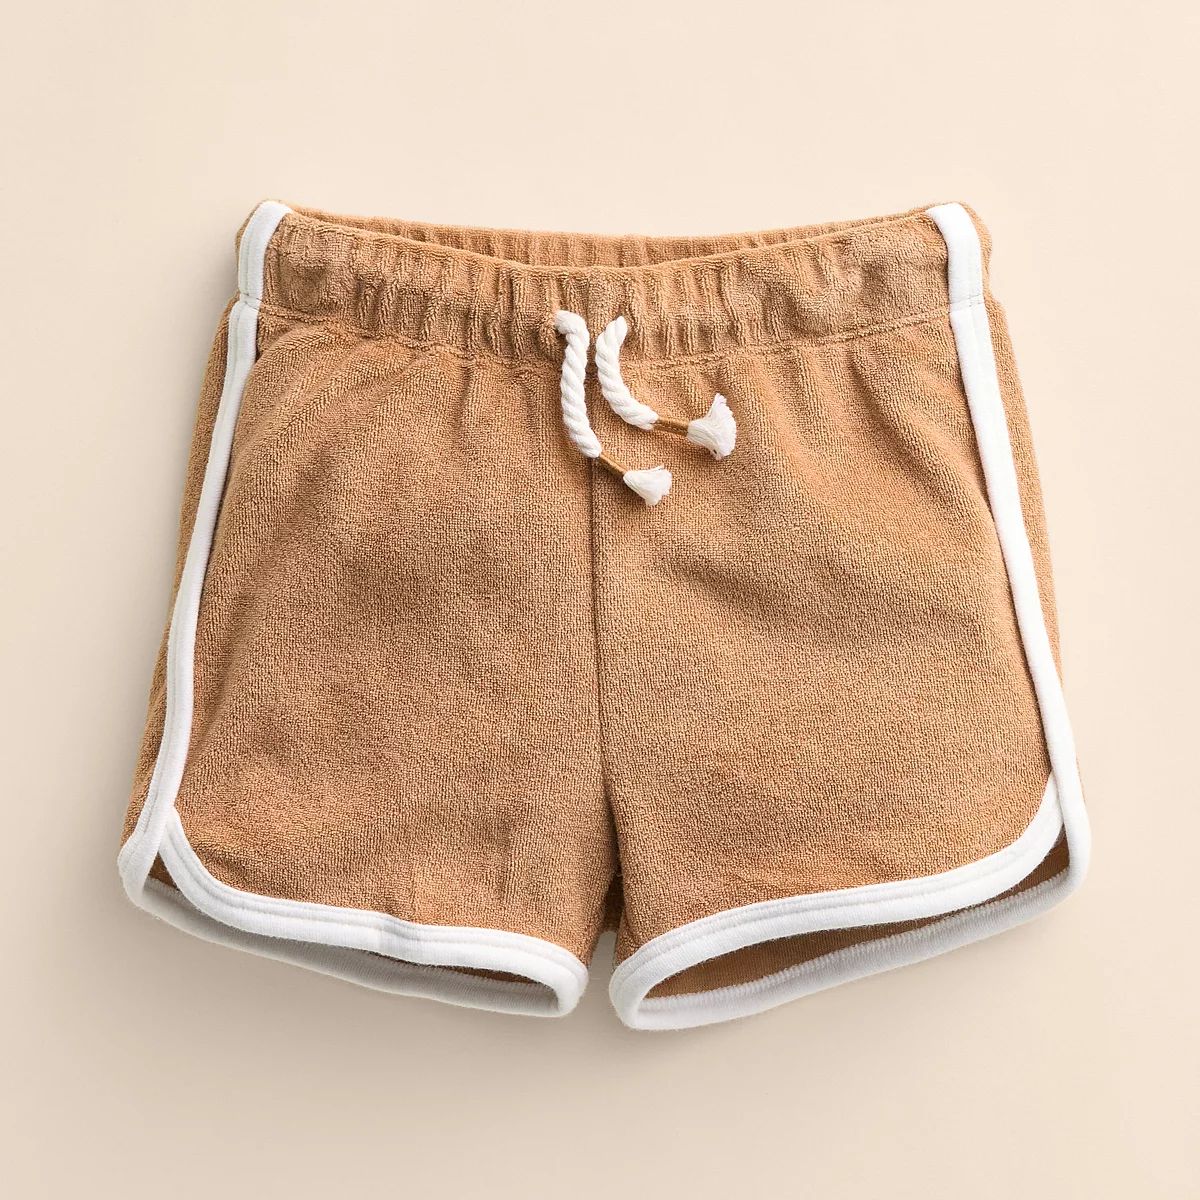 Kids 4-8 Little Co. by Lauren Conrad Terry Cloth Dolphin Shorts | Kohl's